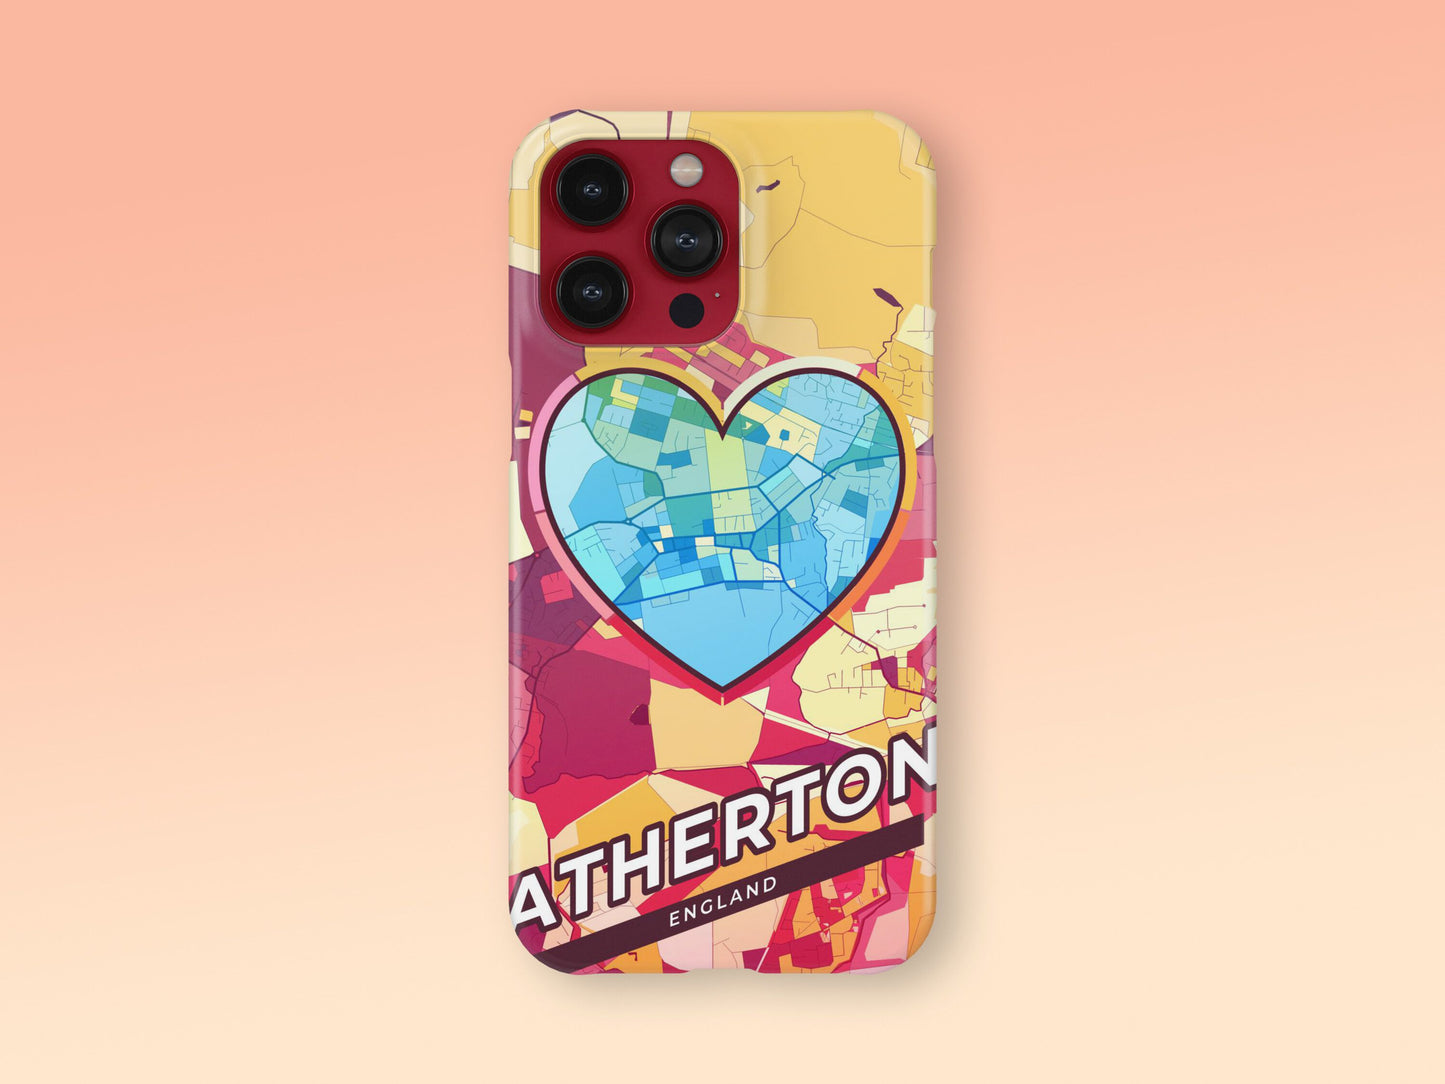 Atherton England slim phone case with colorful icon. Birthday, wedding or housewarming gift. Couple match cases. 2